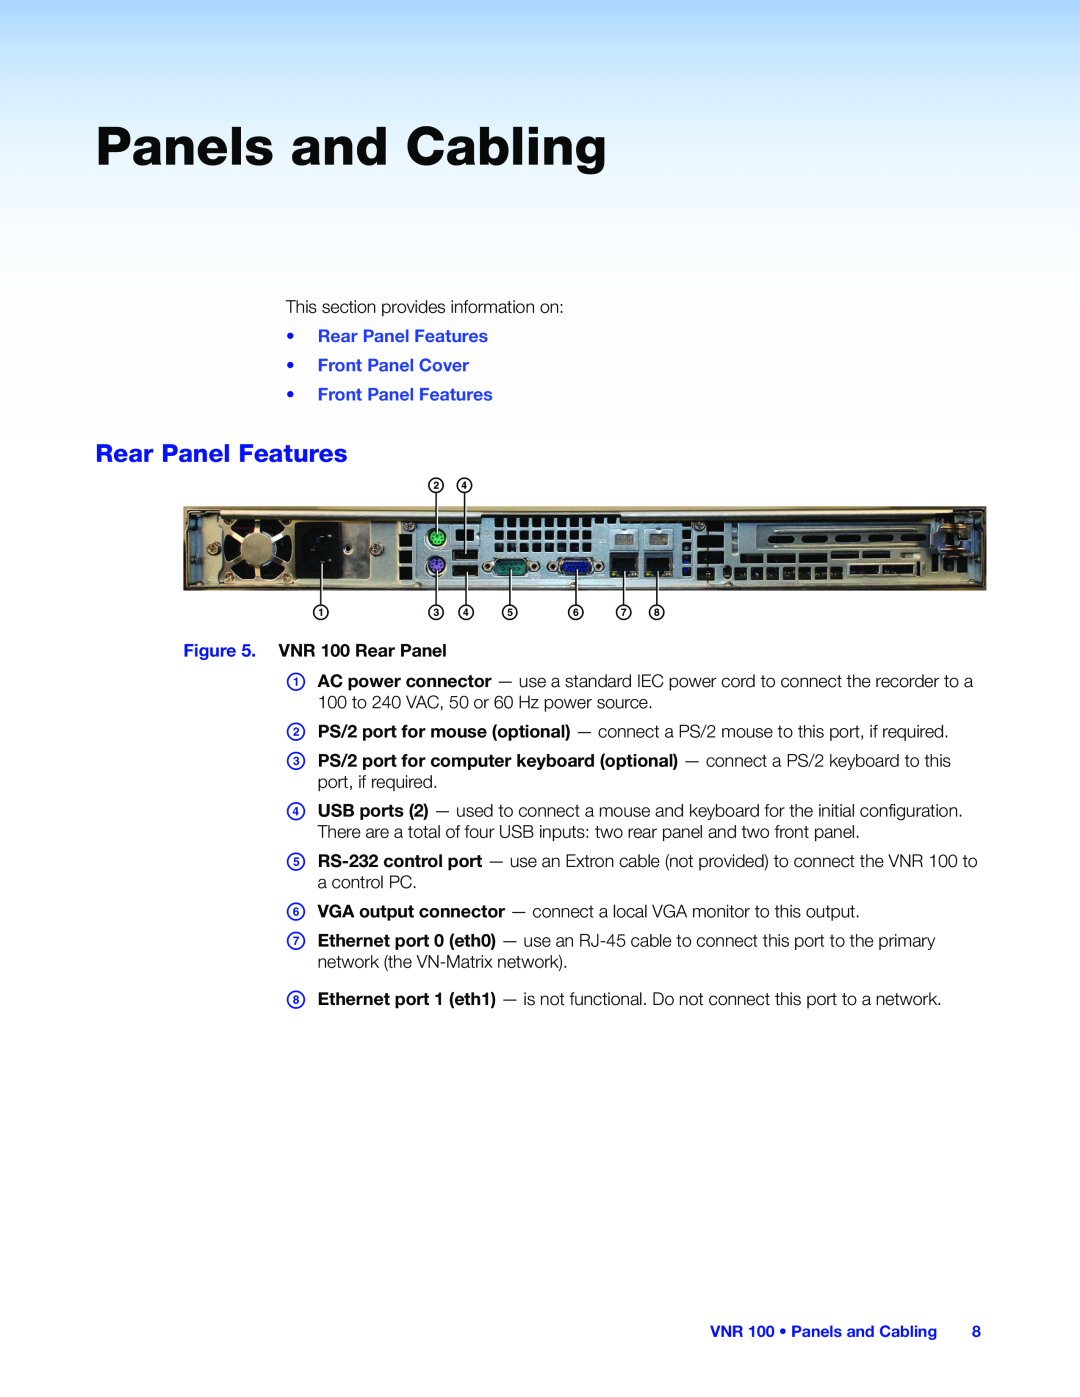 Extron electronic VNR 100 Panels and Cabling, c d e f g h, Rear Panel Features Front Panel Cover, Front Panel Features 